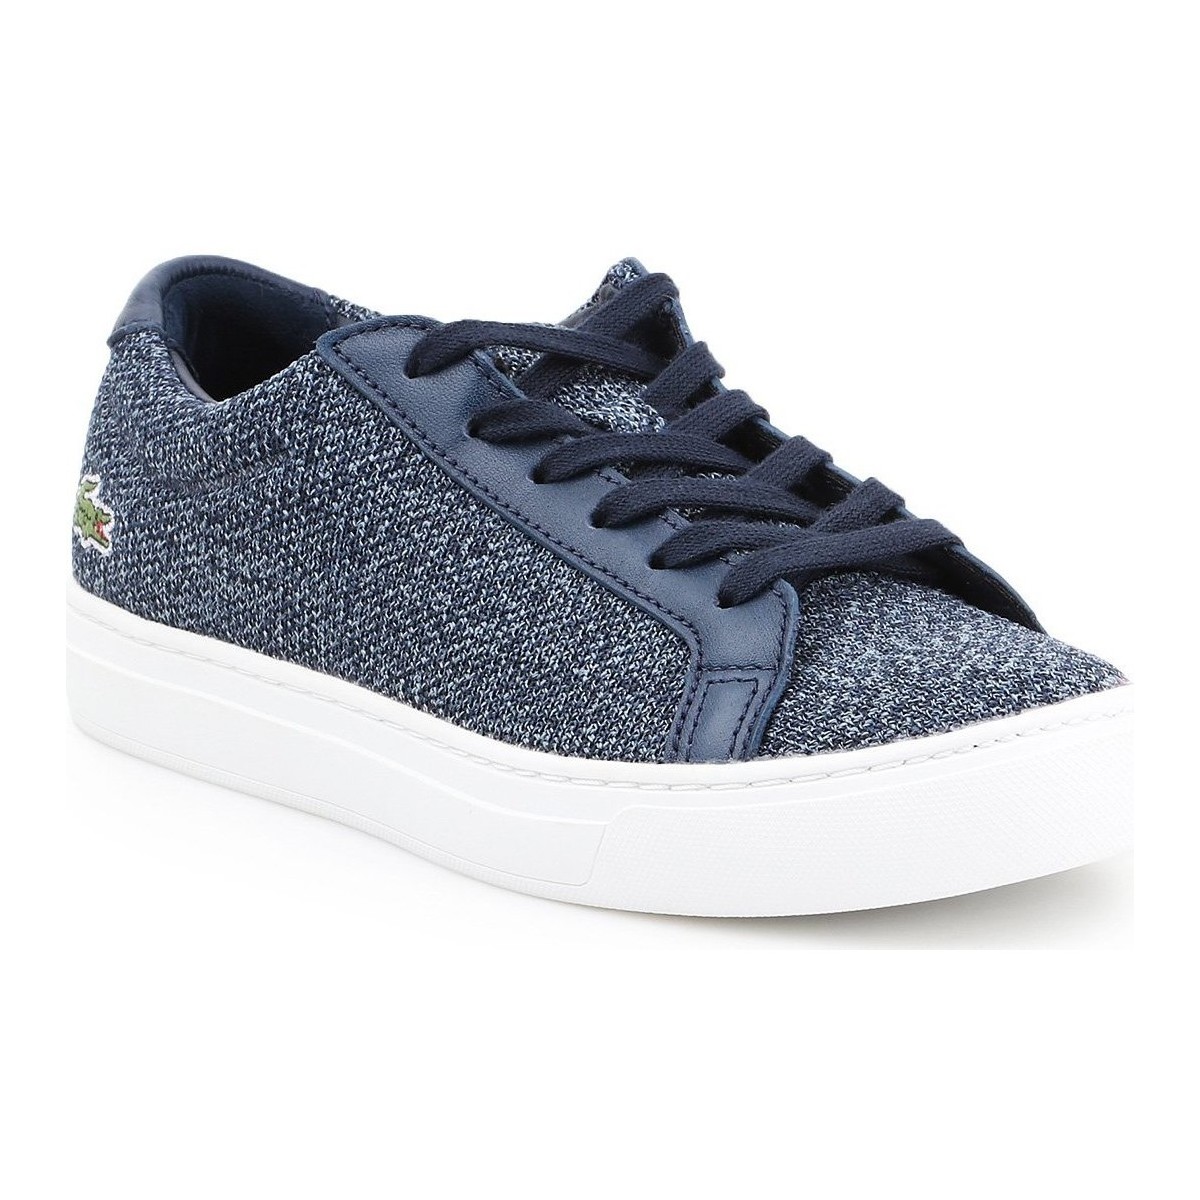 Xαμηλά Sneakers Lacoste L 12 12 317 7-34CAW0017003 Ύφασμα